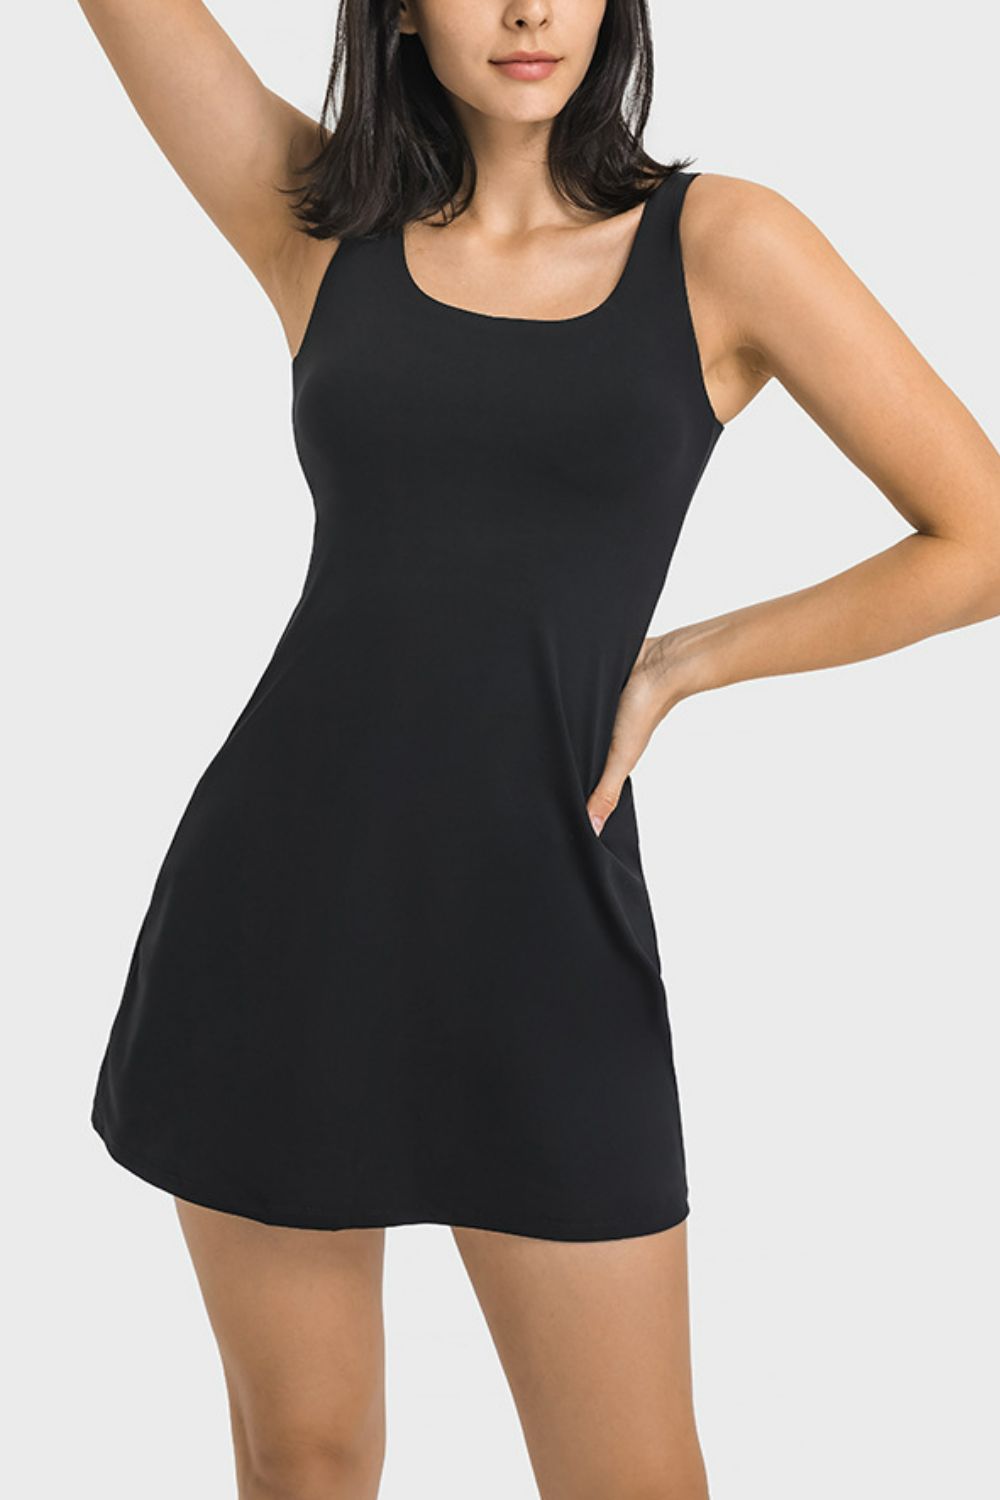 Full Coverage Shortie Bottom One-piece Athletic Tennis Dress